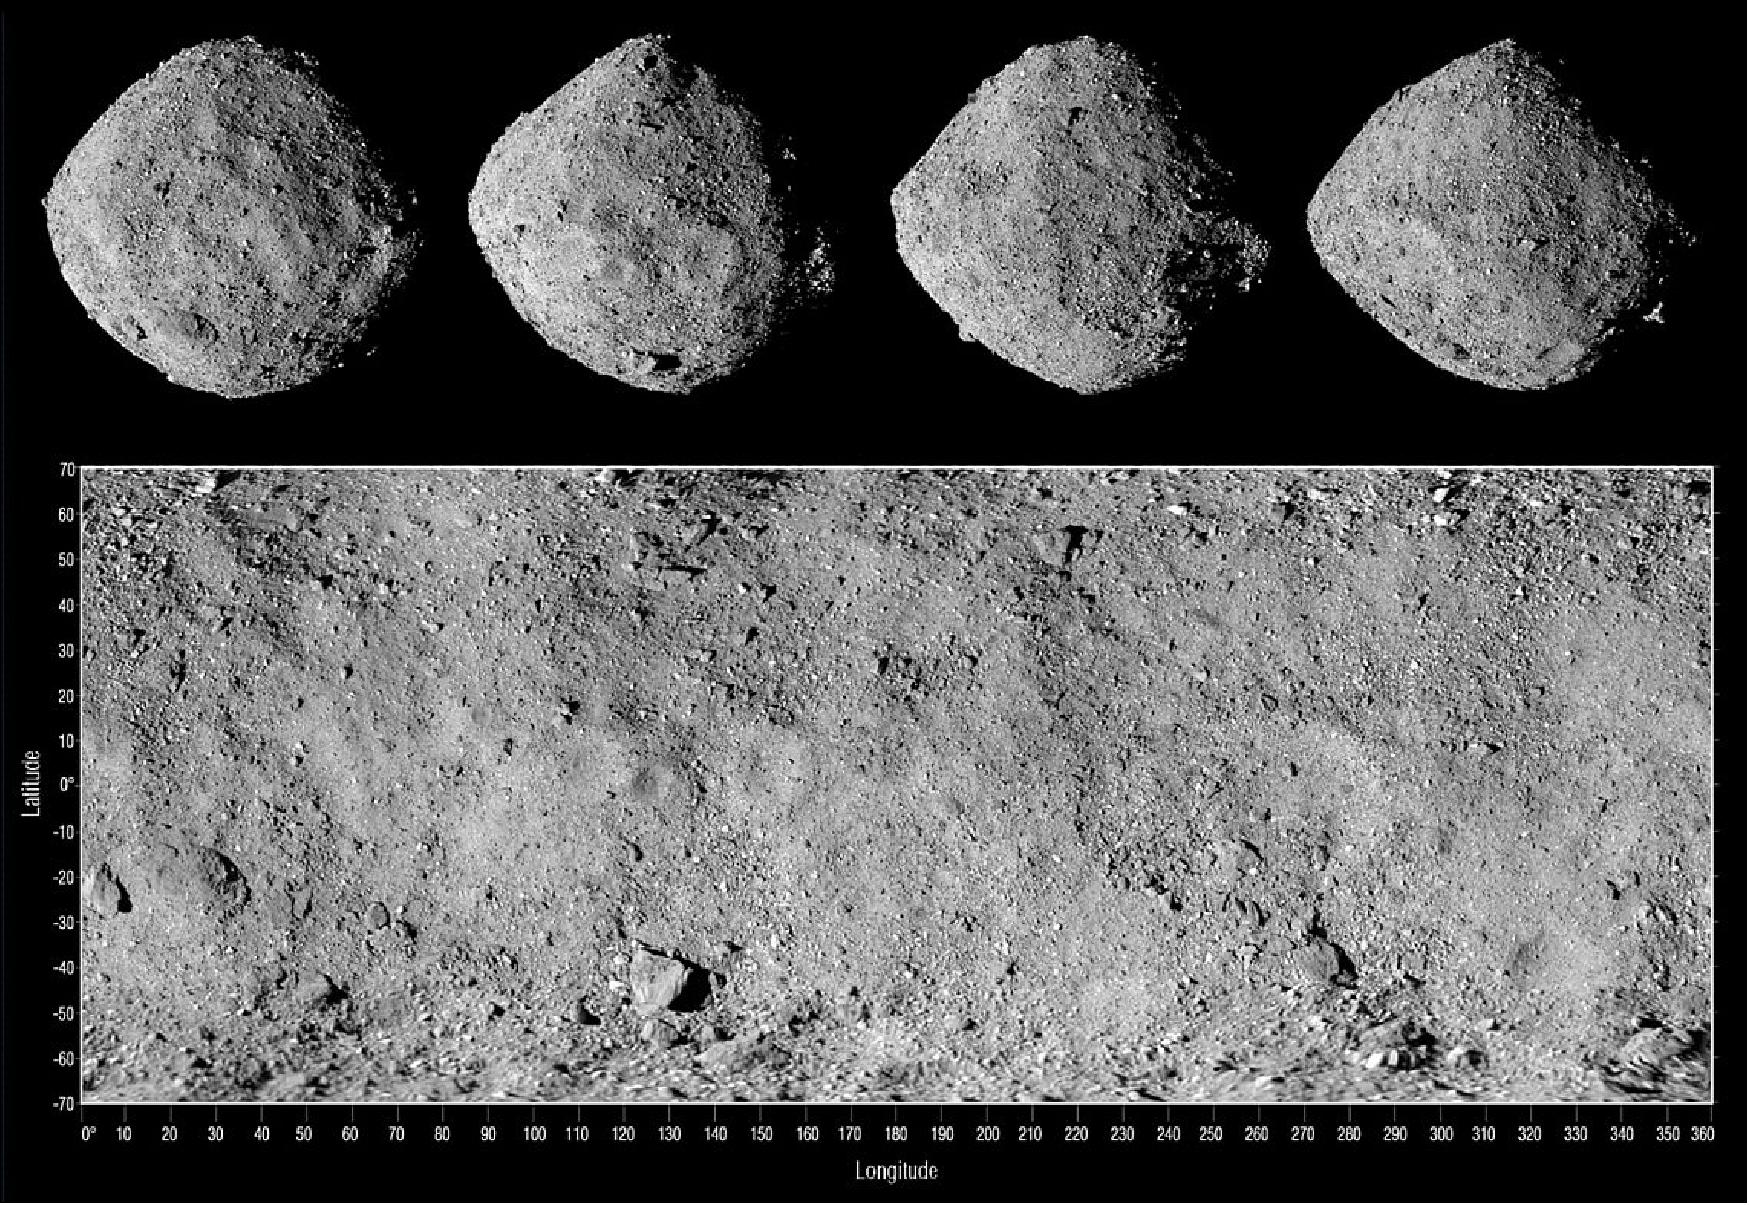 Figure 20: This image shows four views of asteroid Bennu along with a corresponding global mosaic. The images were taken on Dec. 2, 2018, by the OSIRIS-REx spacecraft’s PolyCam camera, which is part of the OCAMS instrument suite designed by UArizona scientists and engineers (image credit: NASA/Goddard/University of Arizona)